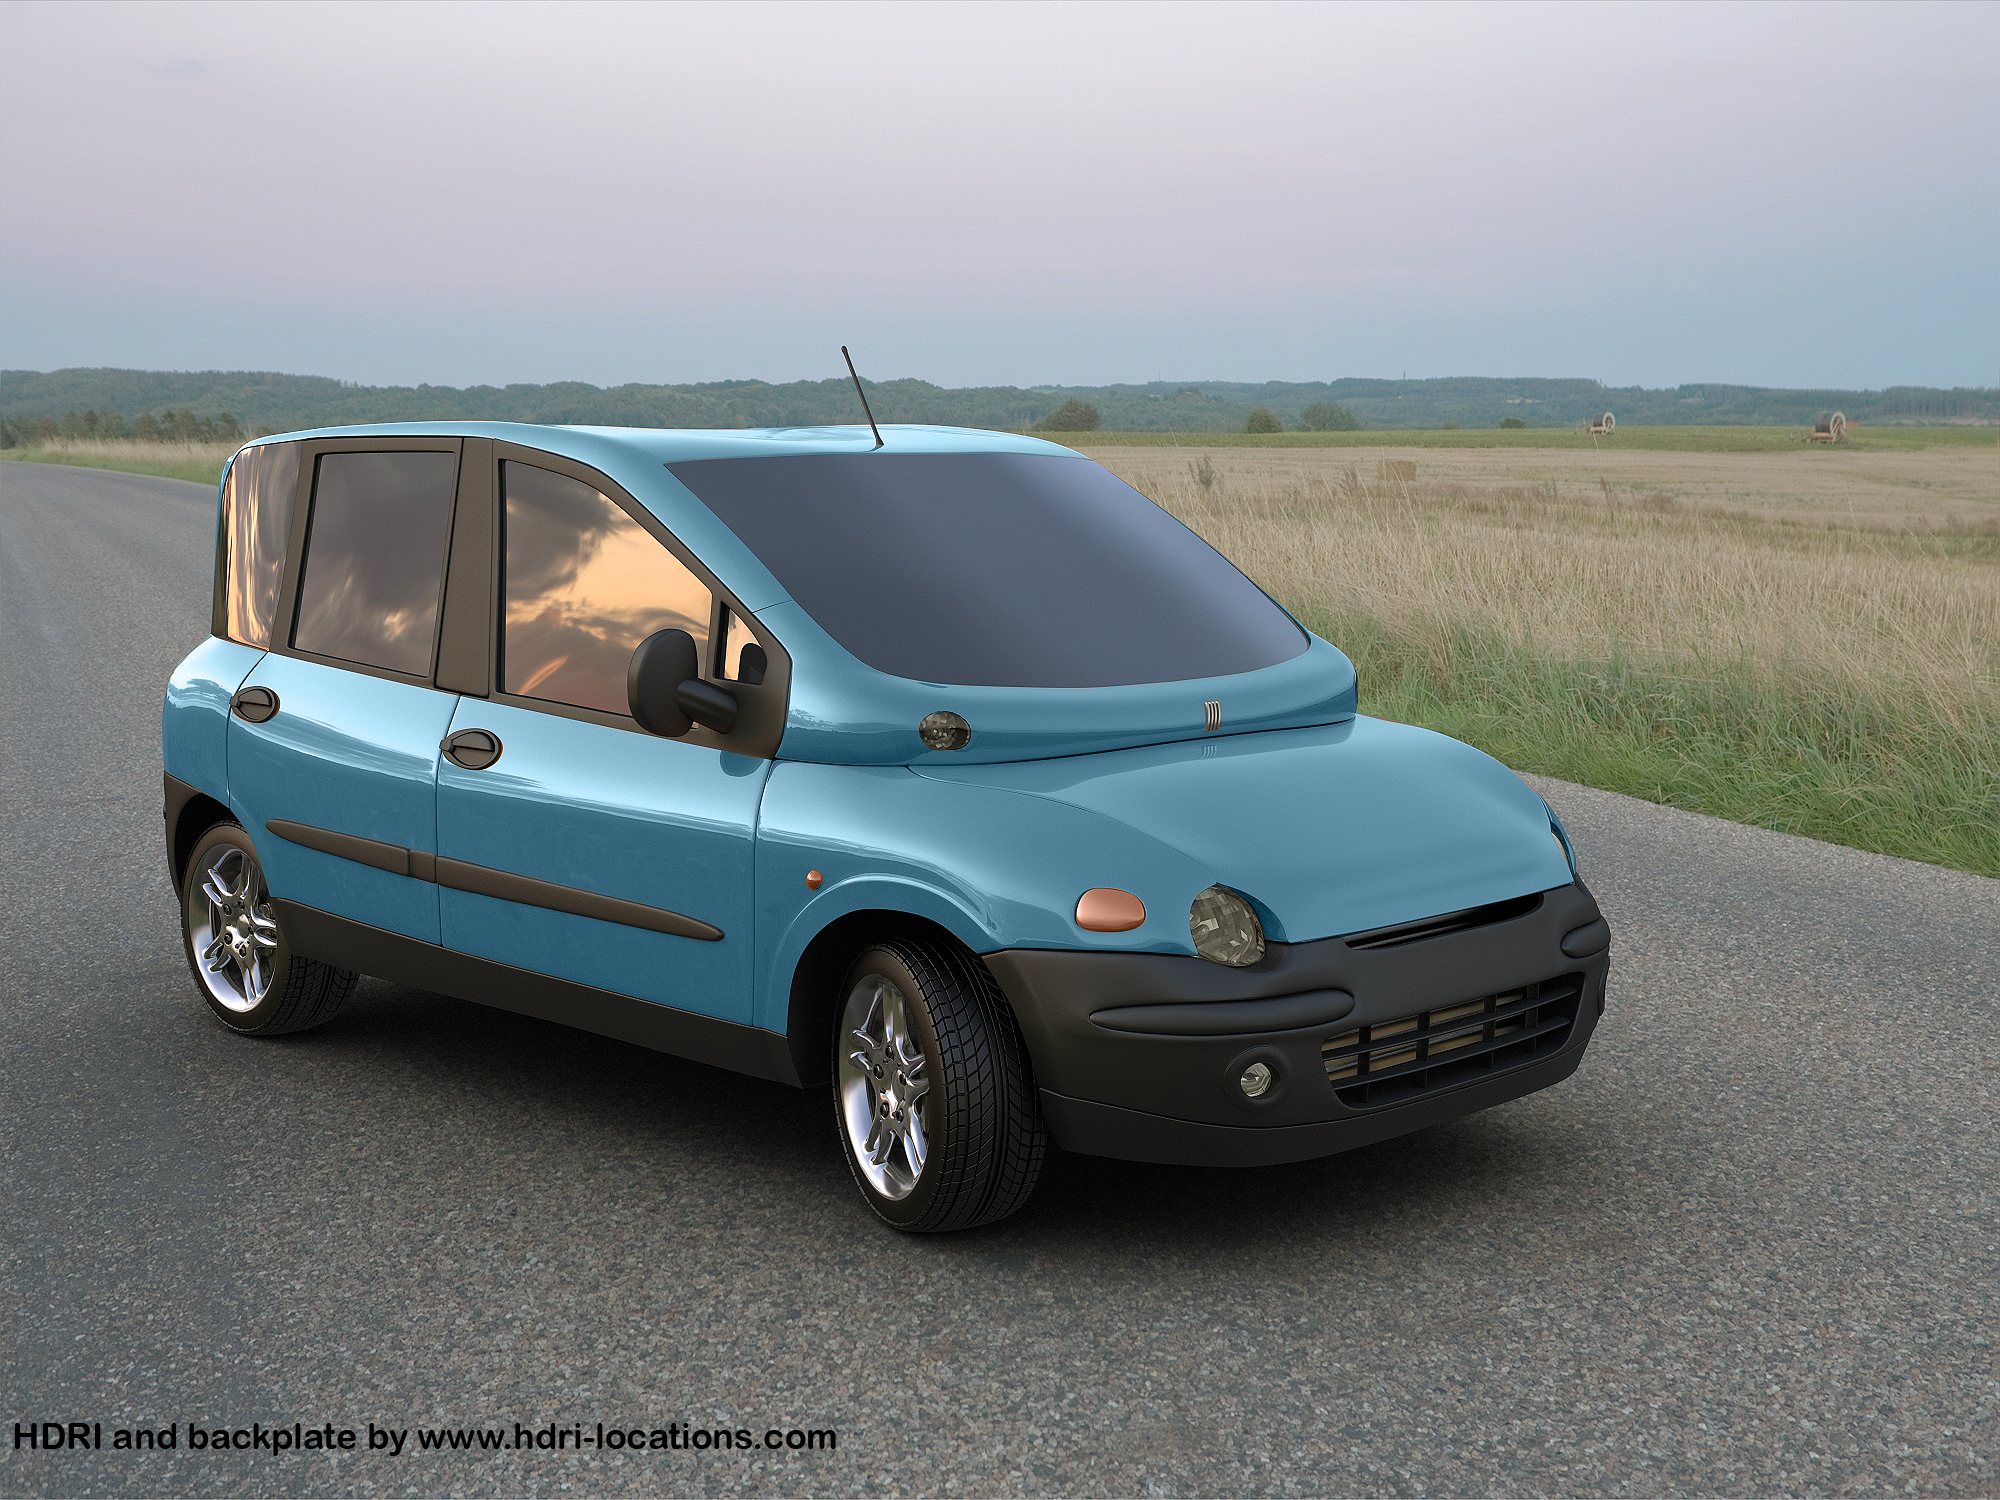 fiat_multipla_by_paskoff-d430qbb.jpg